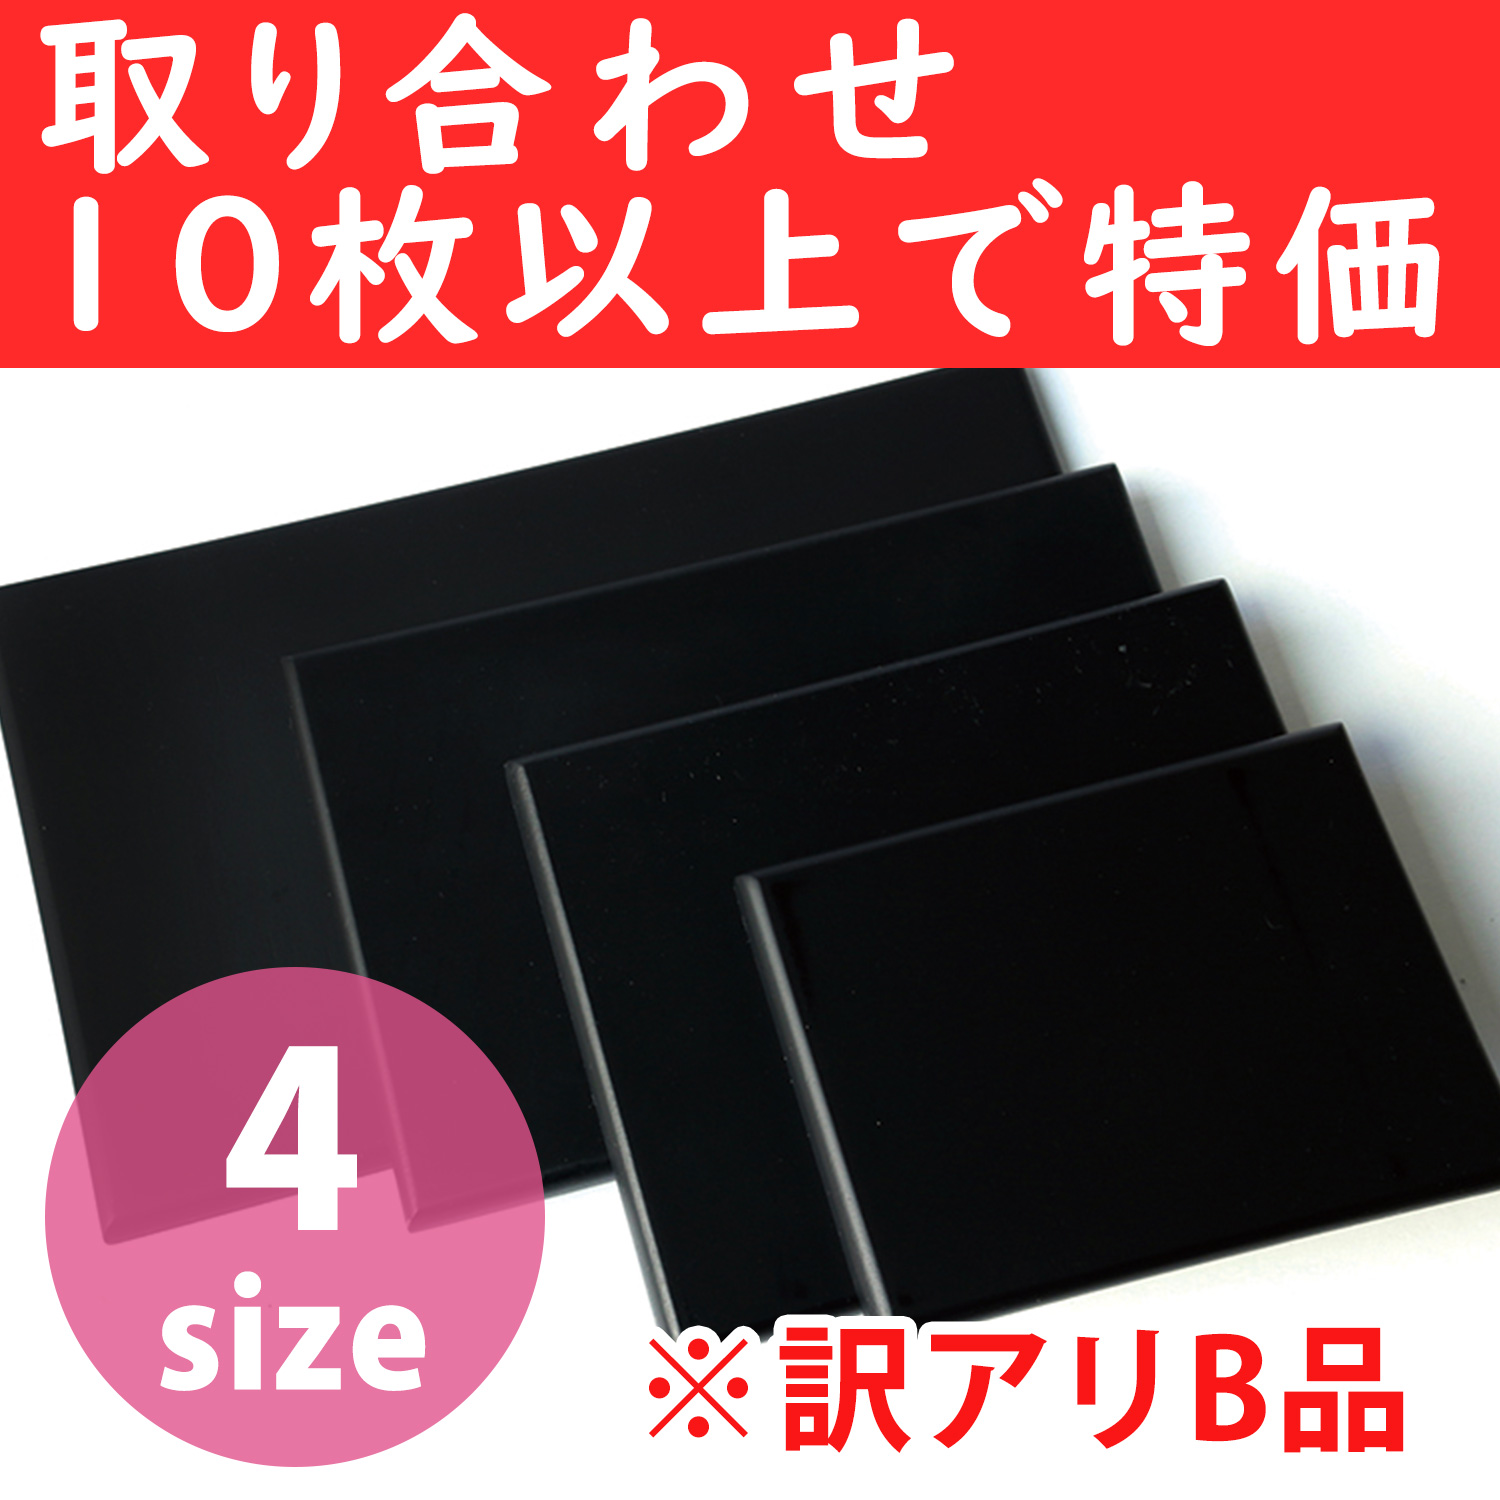 EM-3456 Laquered Base matte , Special price for 10pcs over more (pcs)